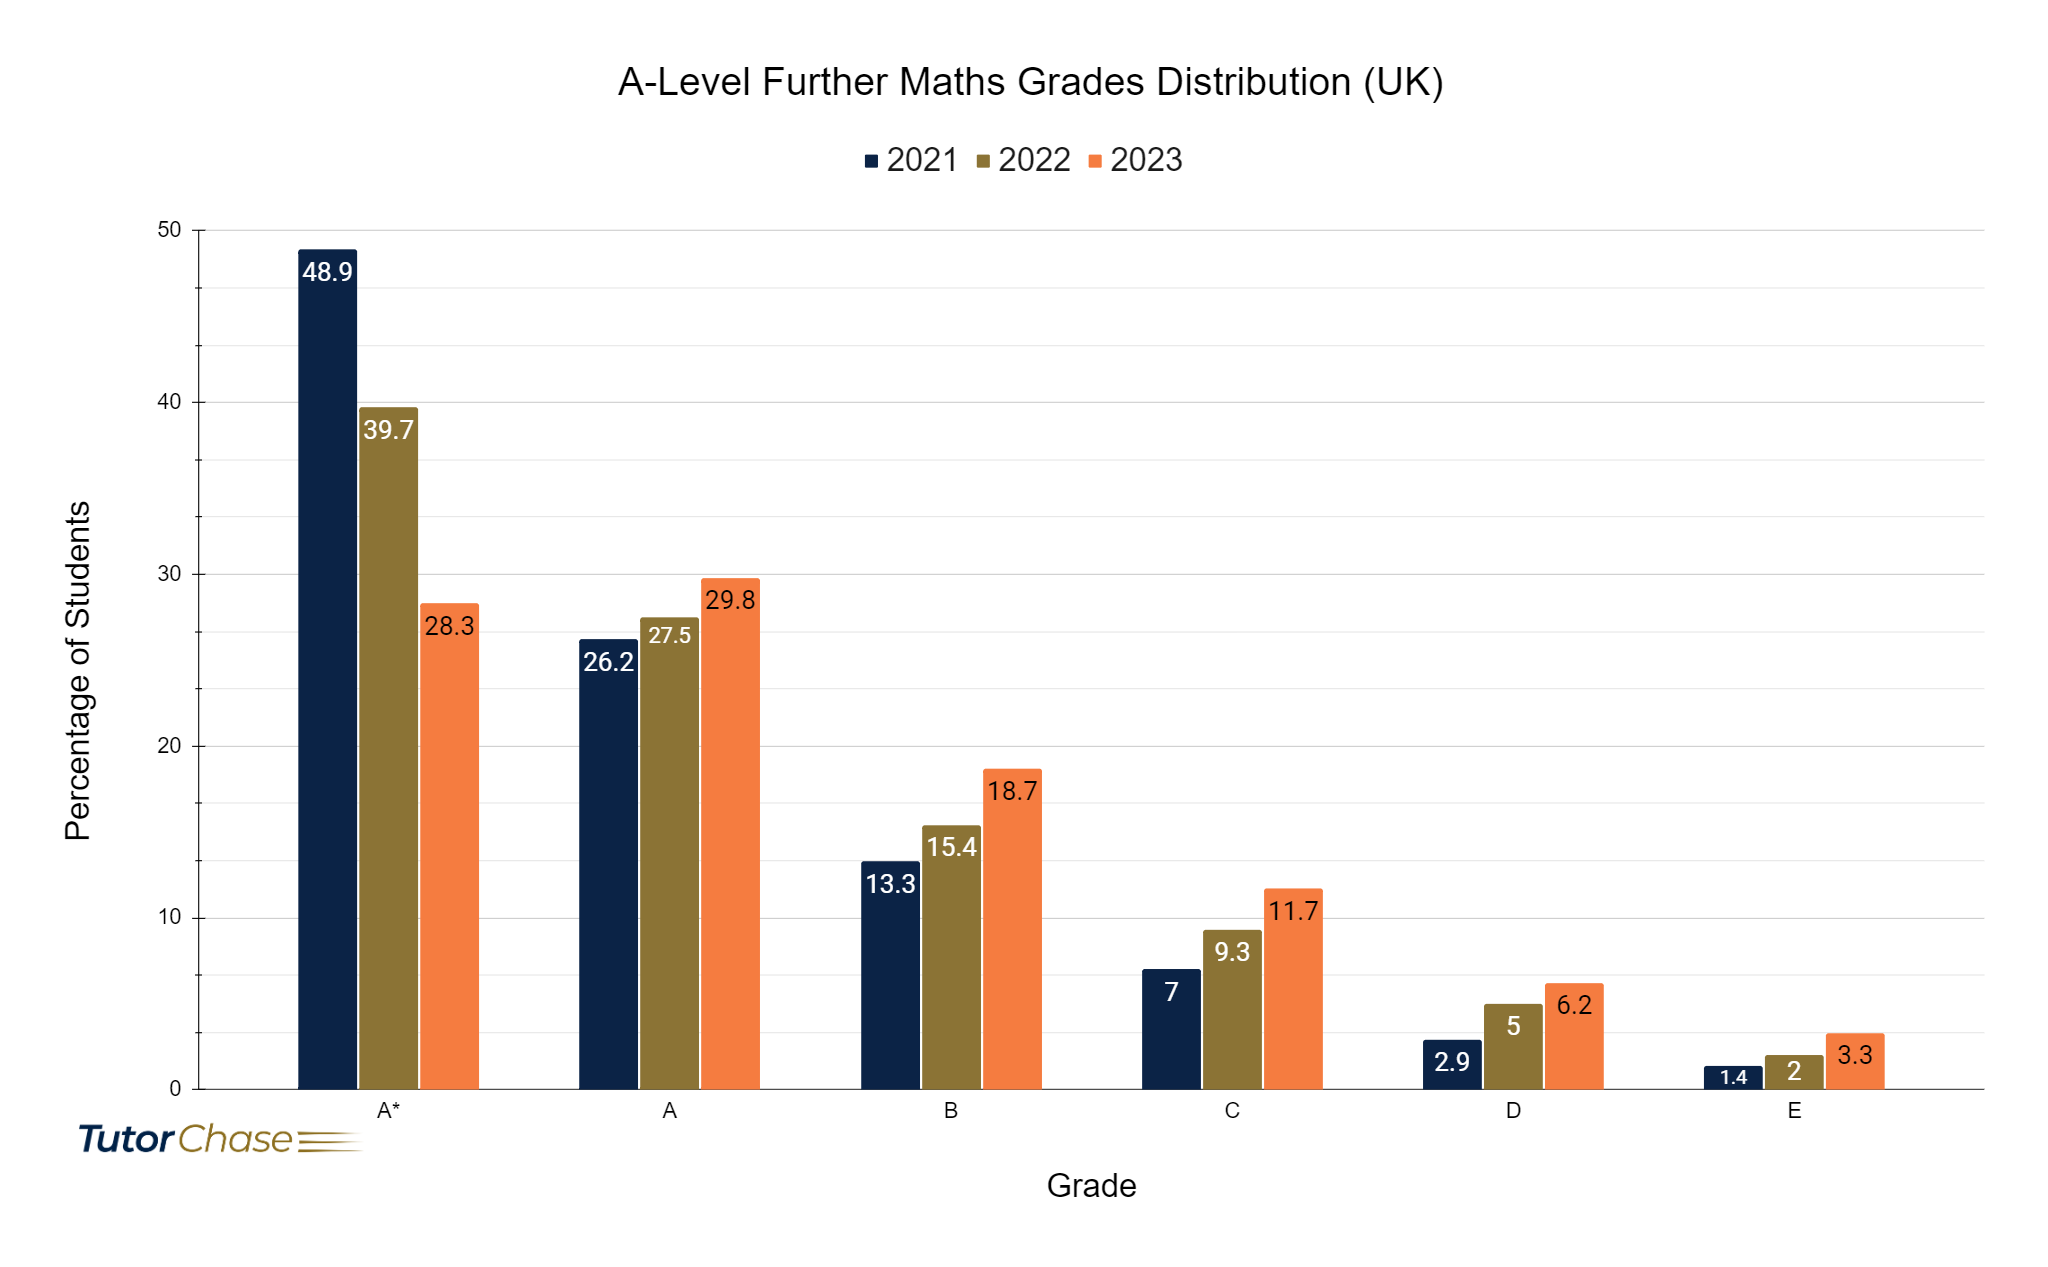 Grades distribution of A-Level Further Maths in UK 2021-2023